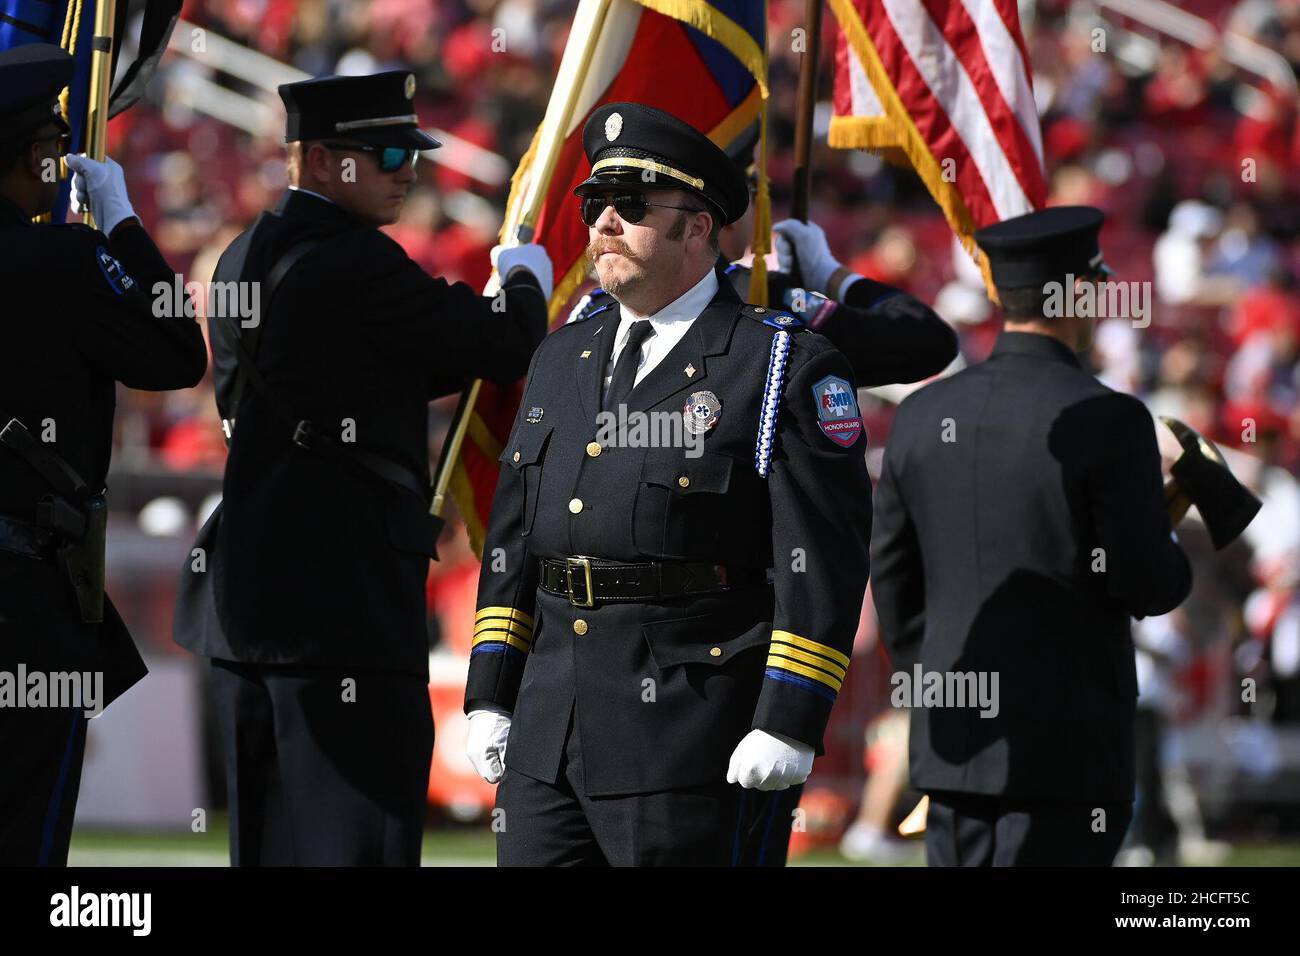 Dallas, Texas, USA. December 28, 2021: Honor Guard marching on the field before the ServPro First Responder bowl game between The United States Air Force Academy and the University of Louisville Cardinals at Gerald J. Ford Stadium in Dallas, TX. Air Force leads the first half against Louisville, 28-14. Patrick Green/CSM Credit: Cal Sport Media/Alamy Live News Stock Photo